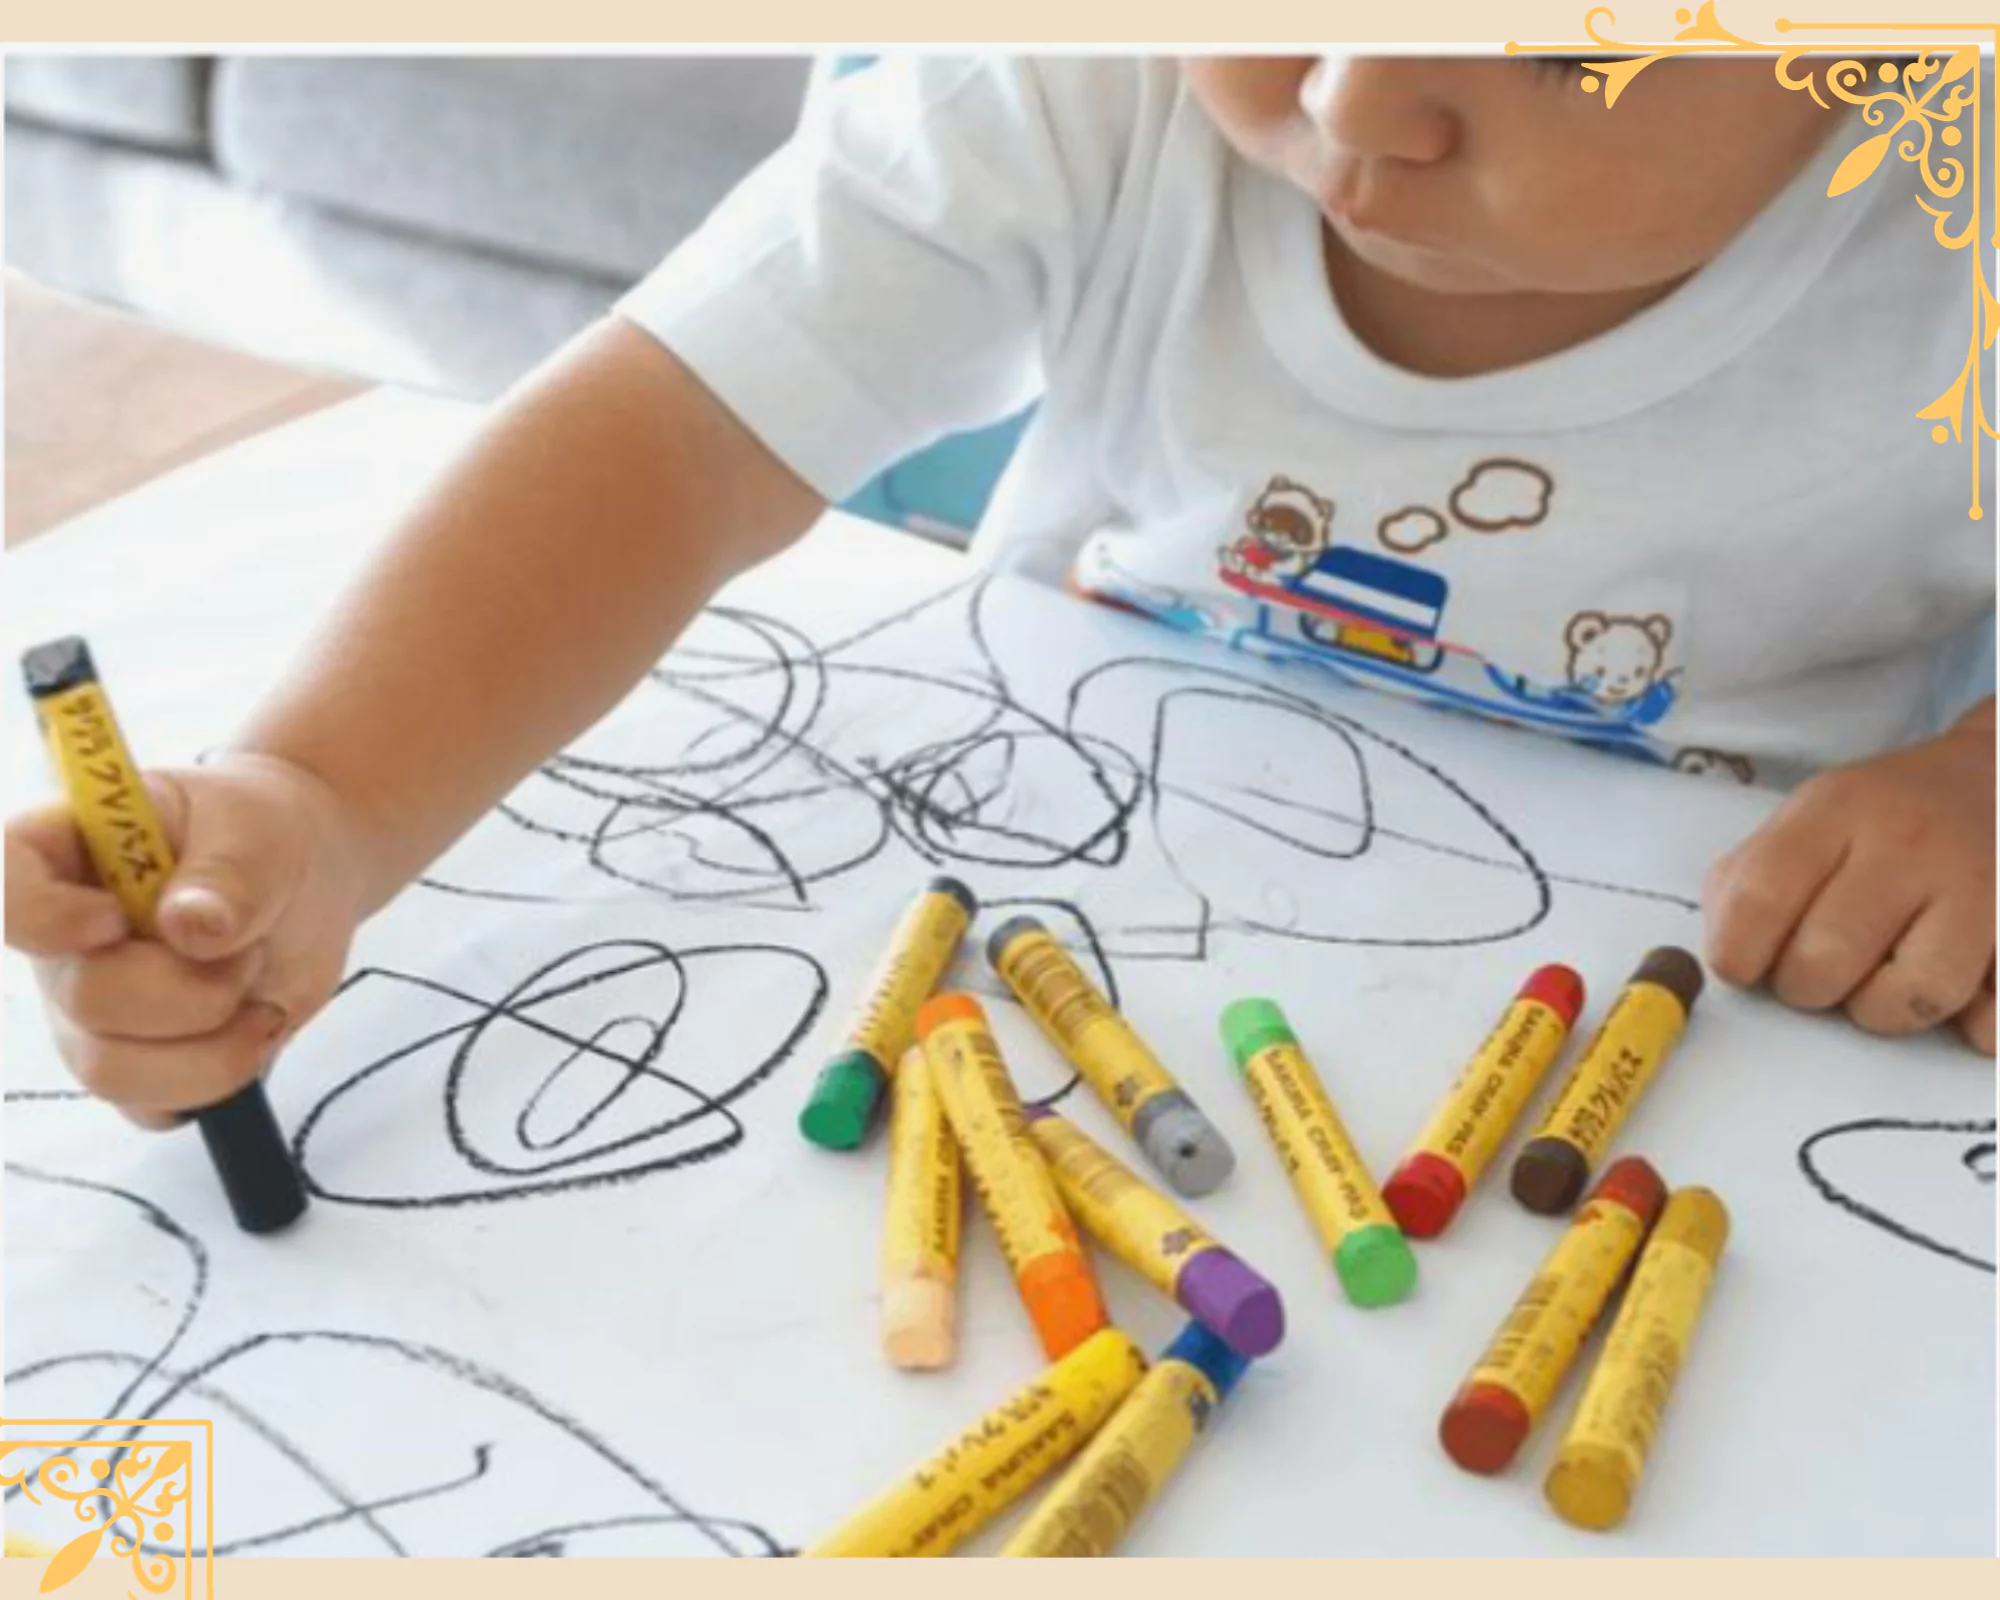 HOW TO ENHANCE CREATIVITY AND IMAGINATION IN KIDS THROUGH ARTS AND CRAFTS